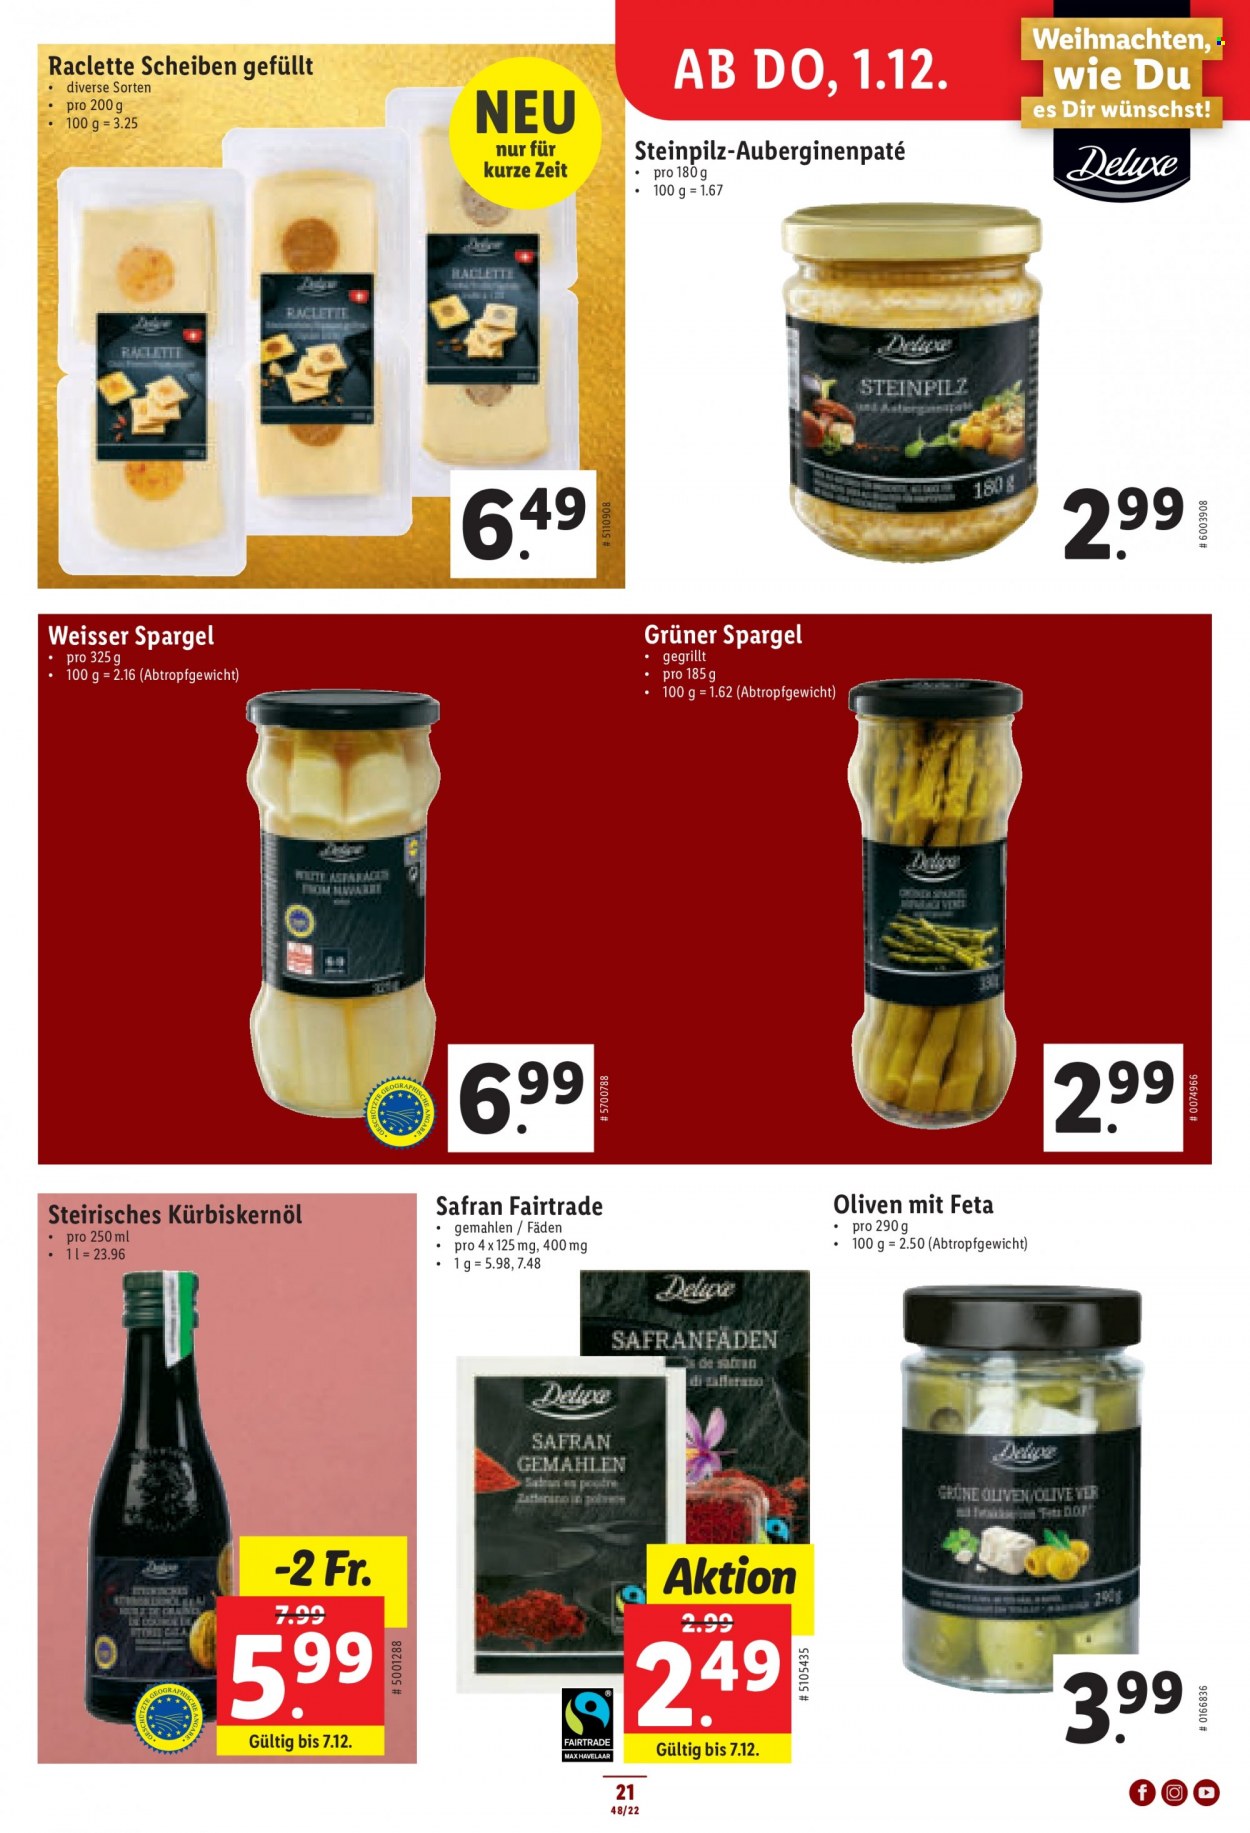 Catalogue Lidl - 1.12.2022 - 7.12.2022. Page 21.